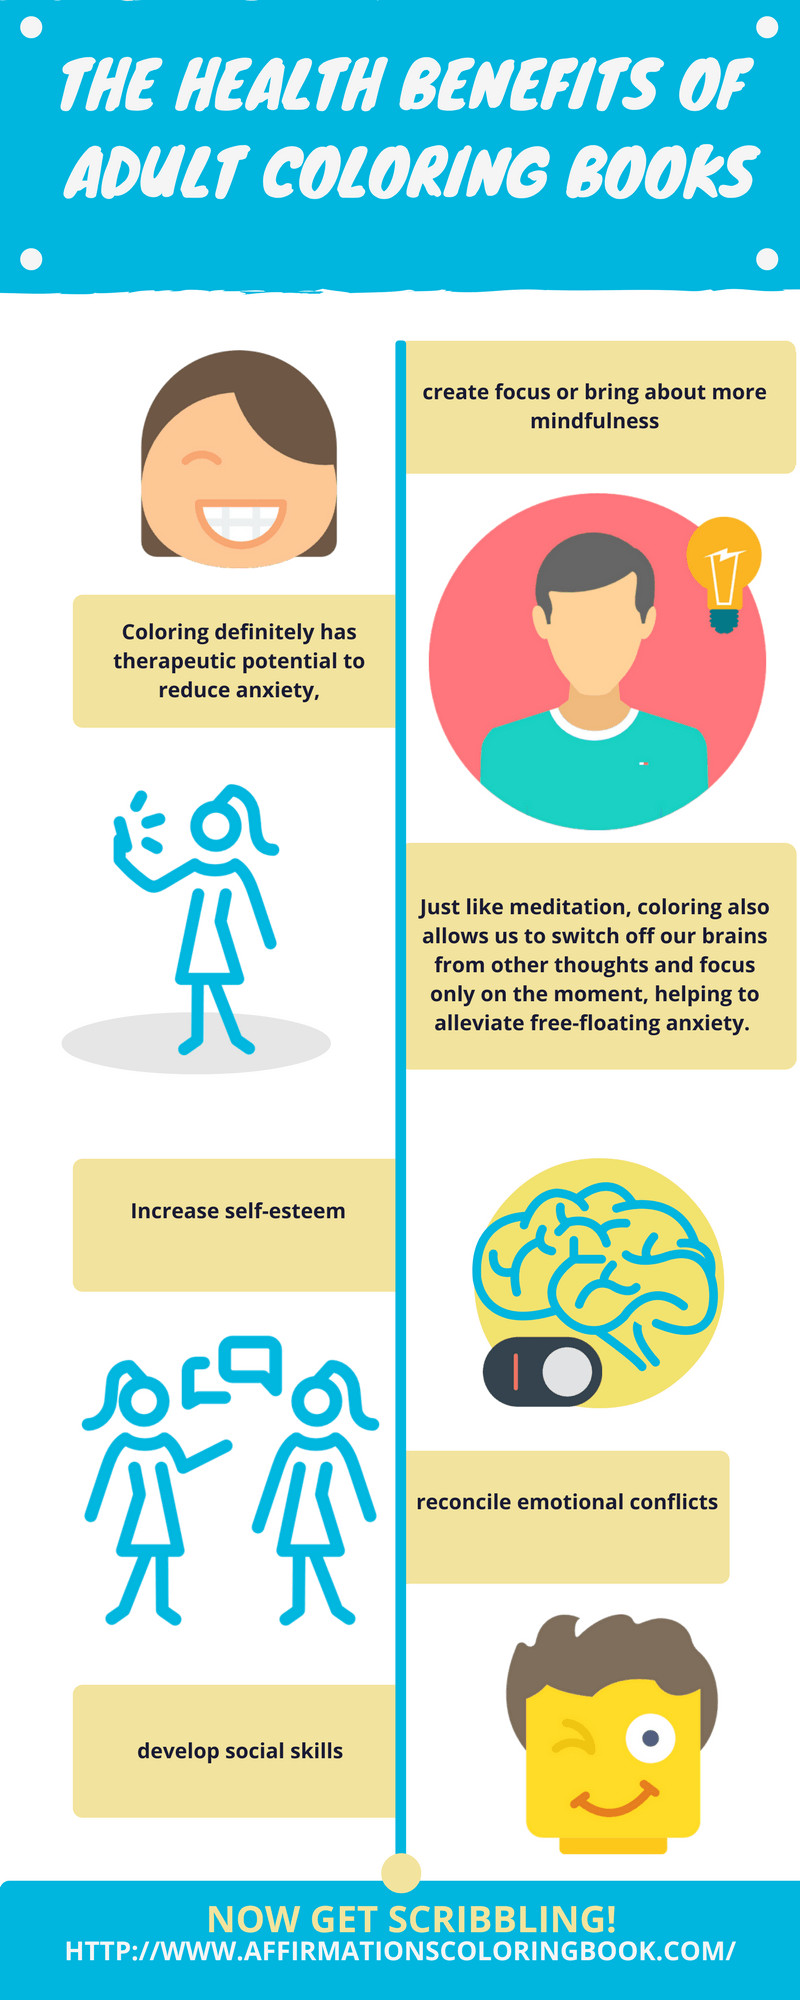 Adult Coloring Books Benefits
 The Health Benefits of Adult Coloring Books Infographic